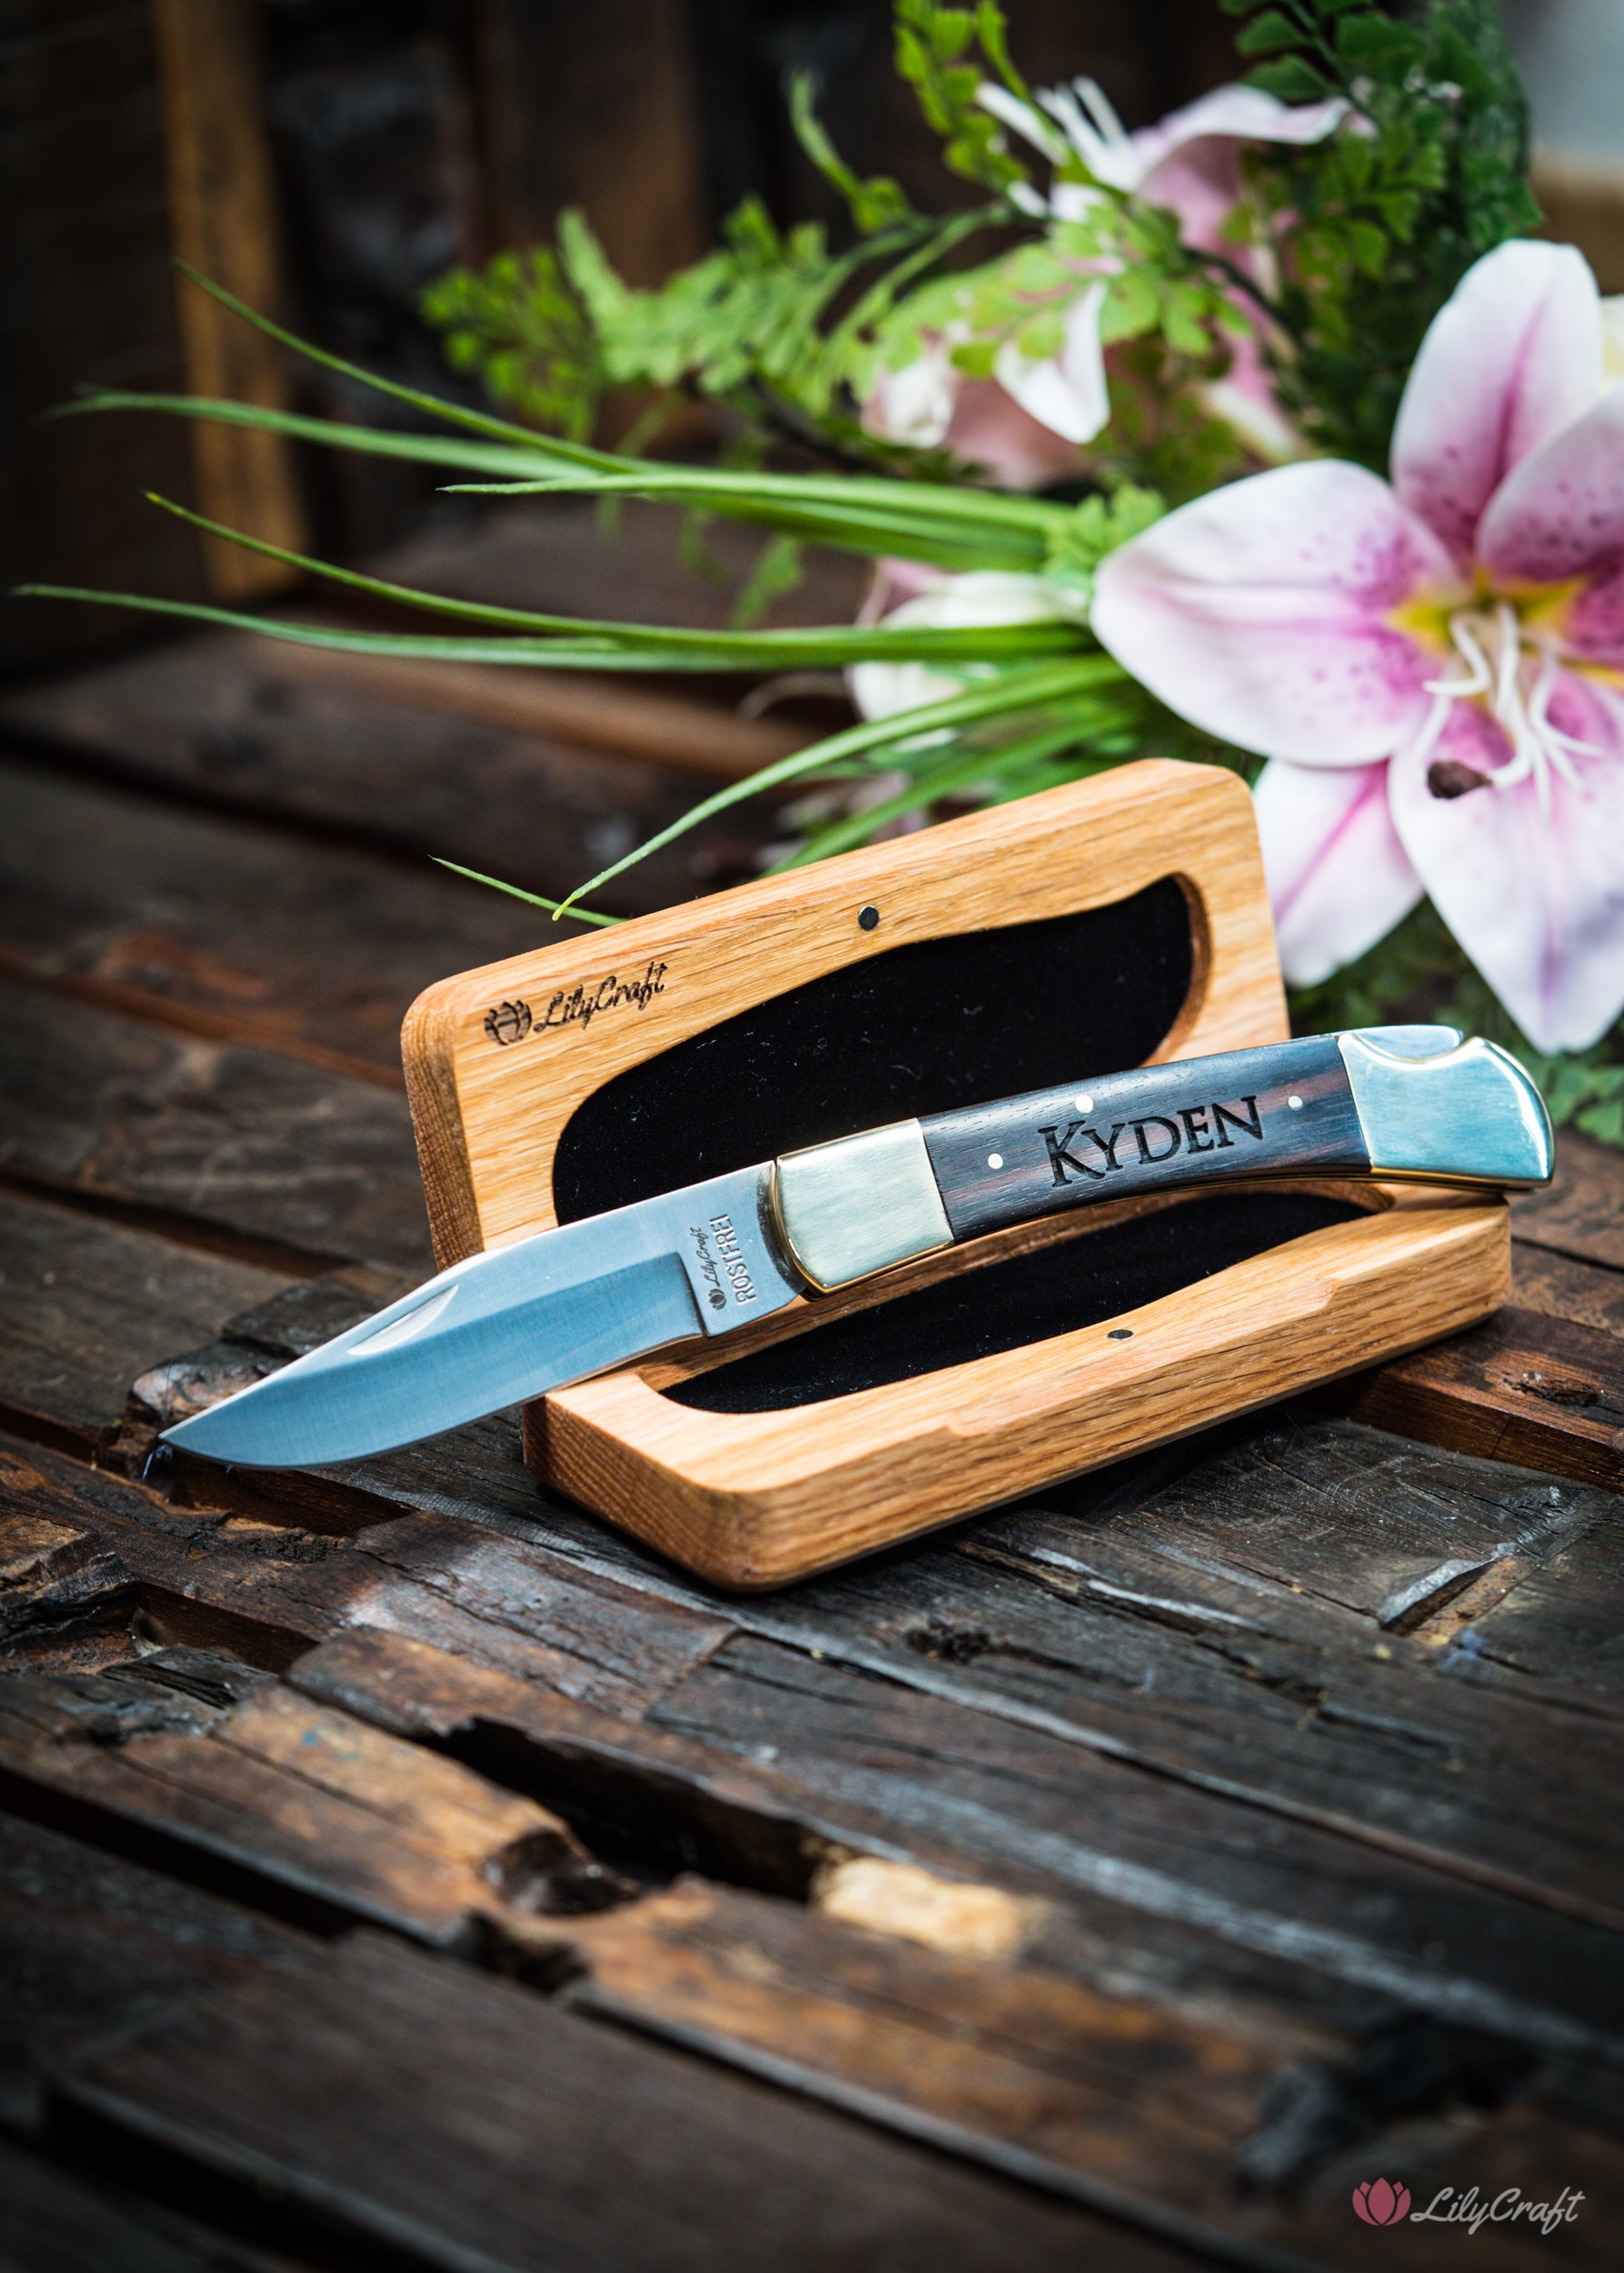 A collector's dream - Gentlemen's Knife with custom engraving